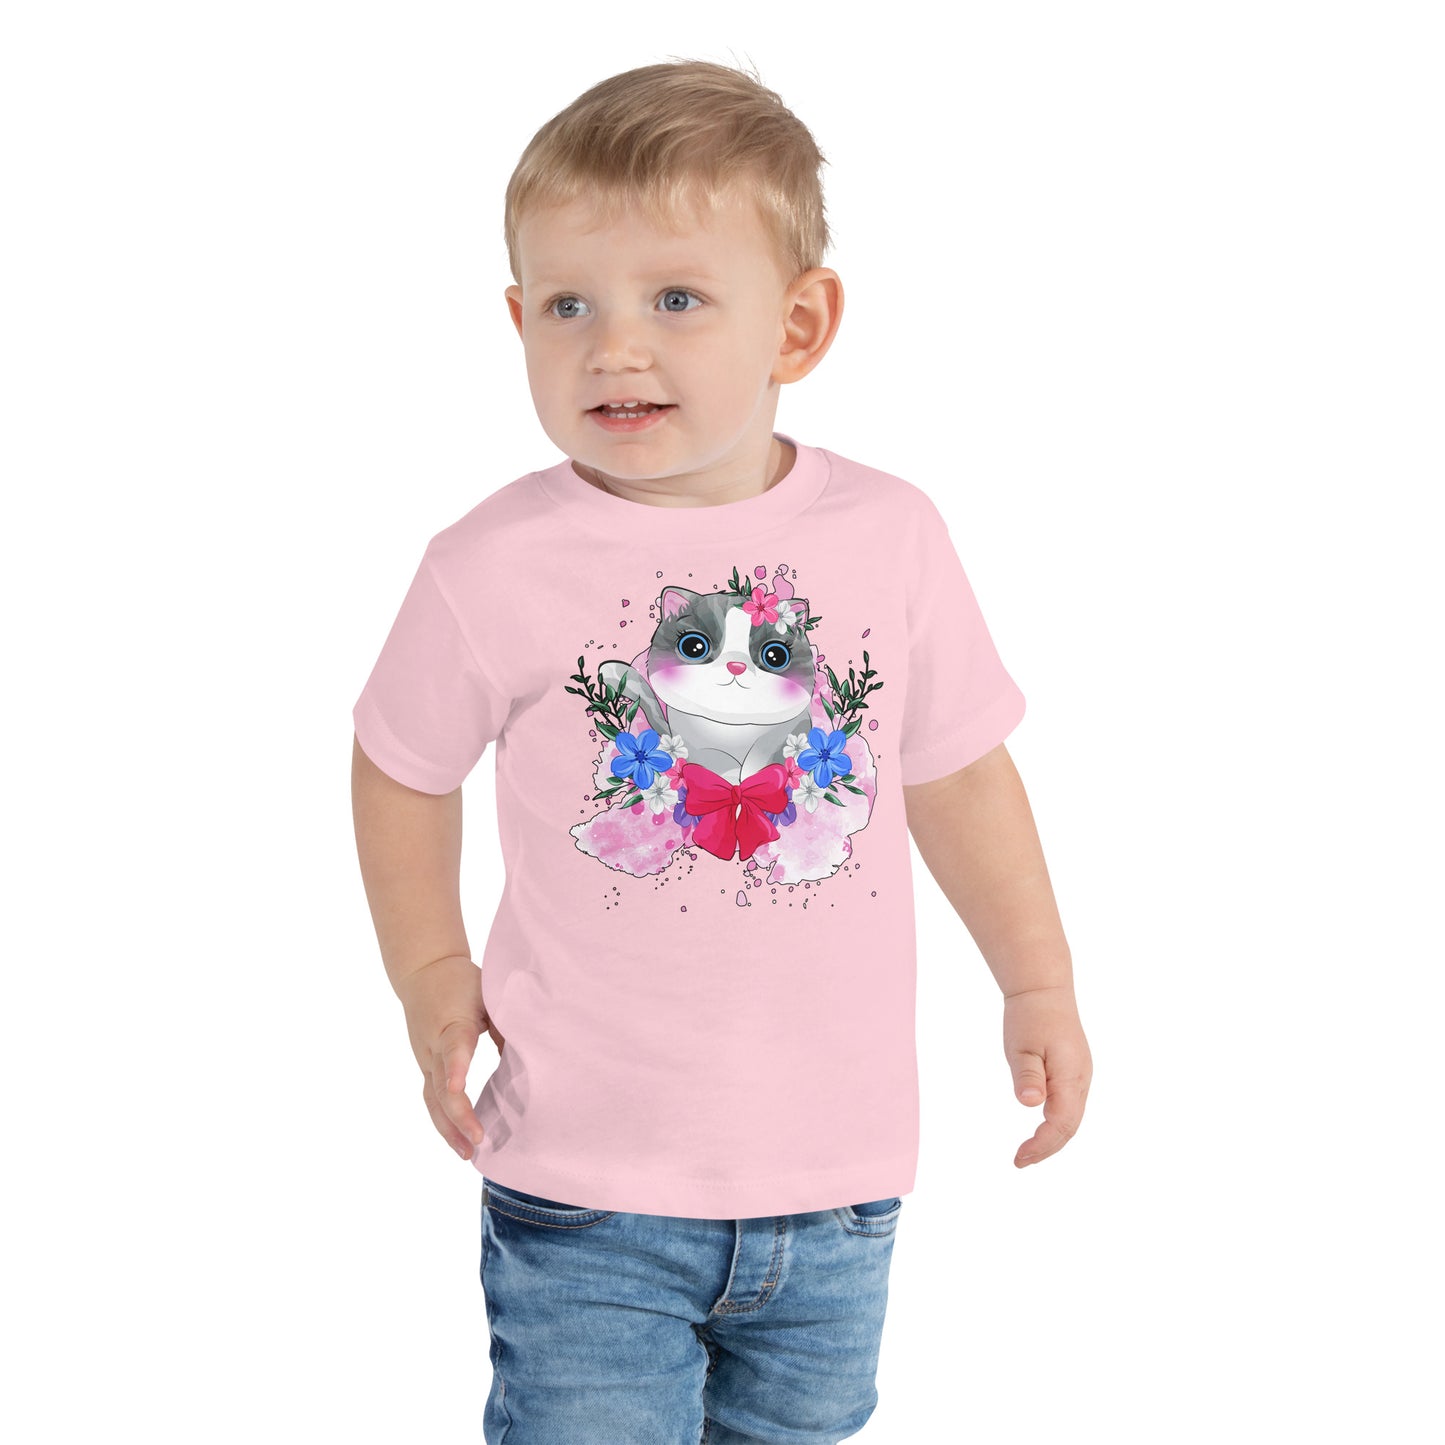 Cute Kitty Cat with Flowers T-shirt, No. 0328